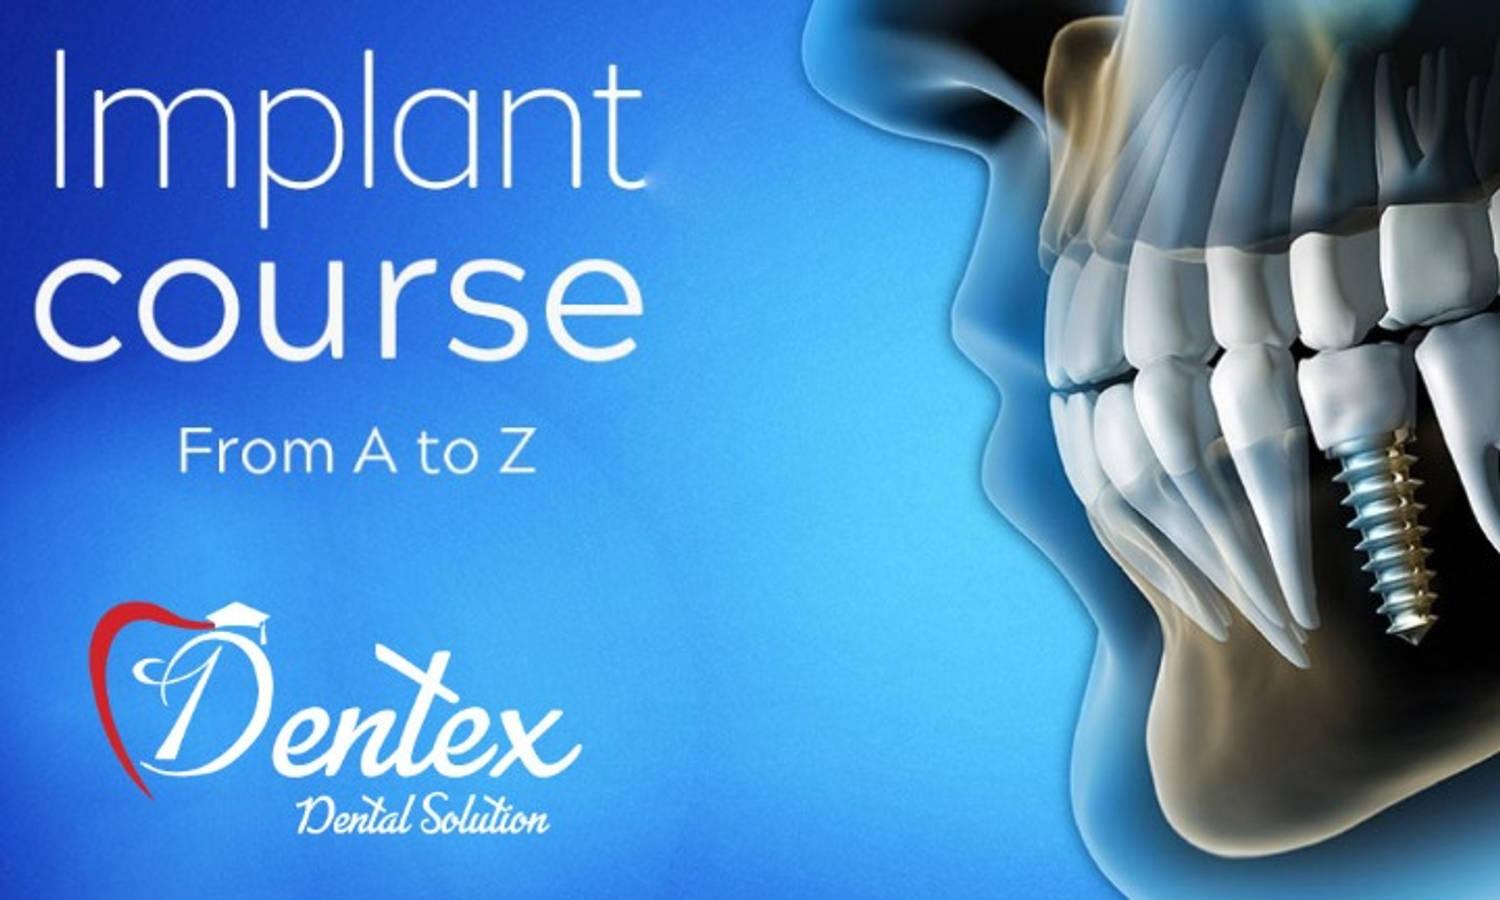 Implant Course from A to Z